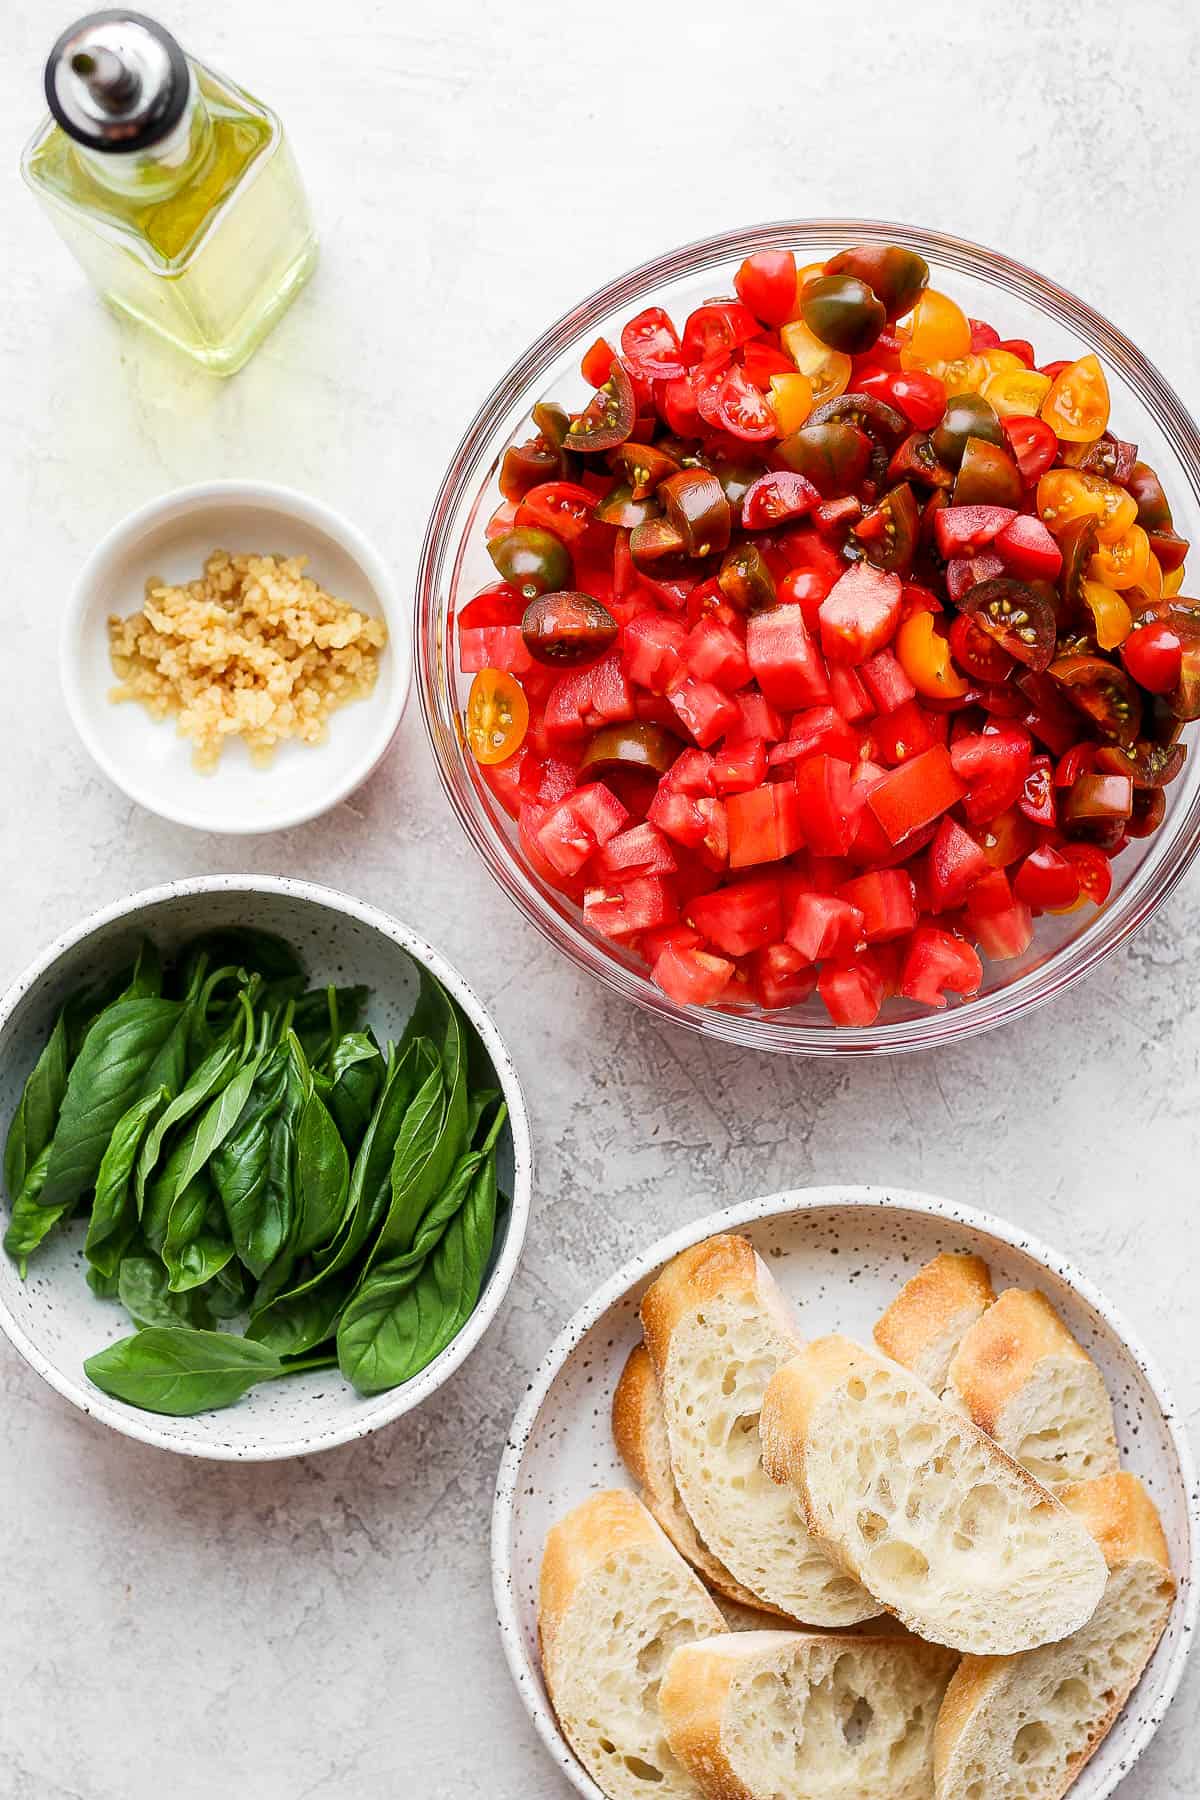 Bowls of cut tomatoes, garlic, basil leaves, and baguette slices on a plate.